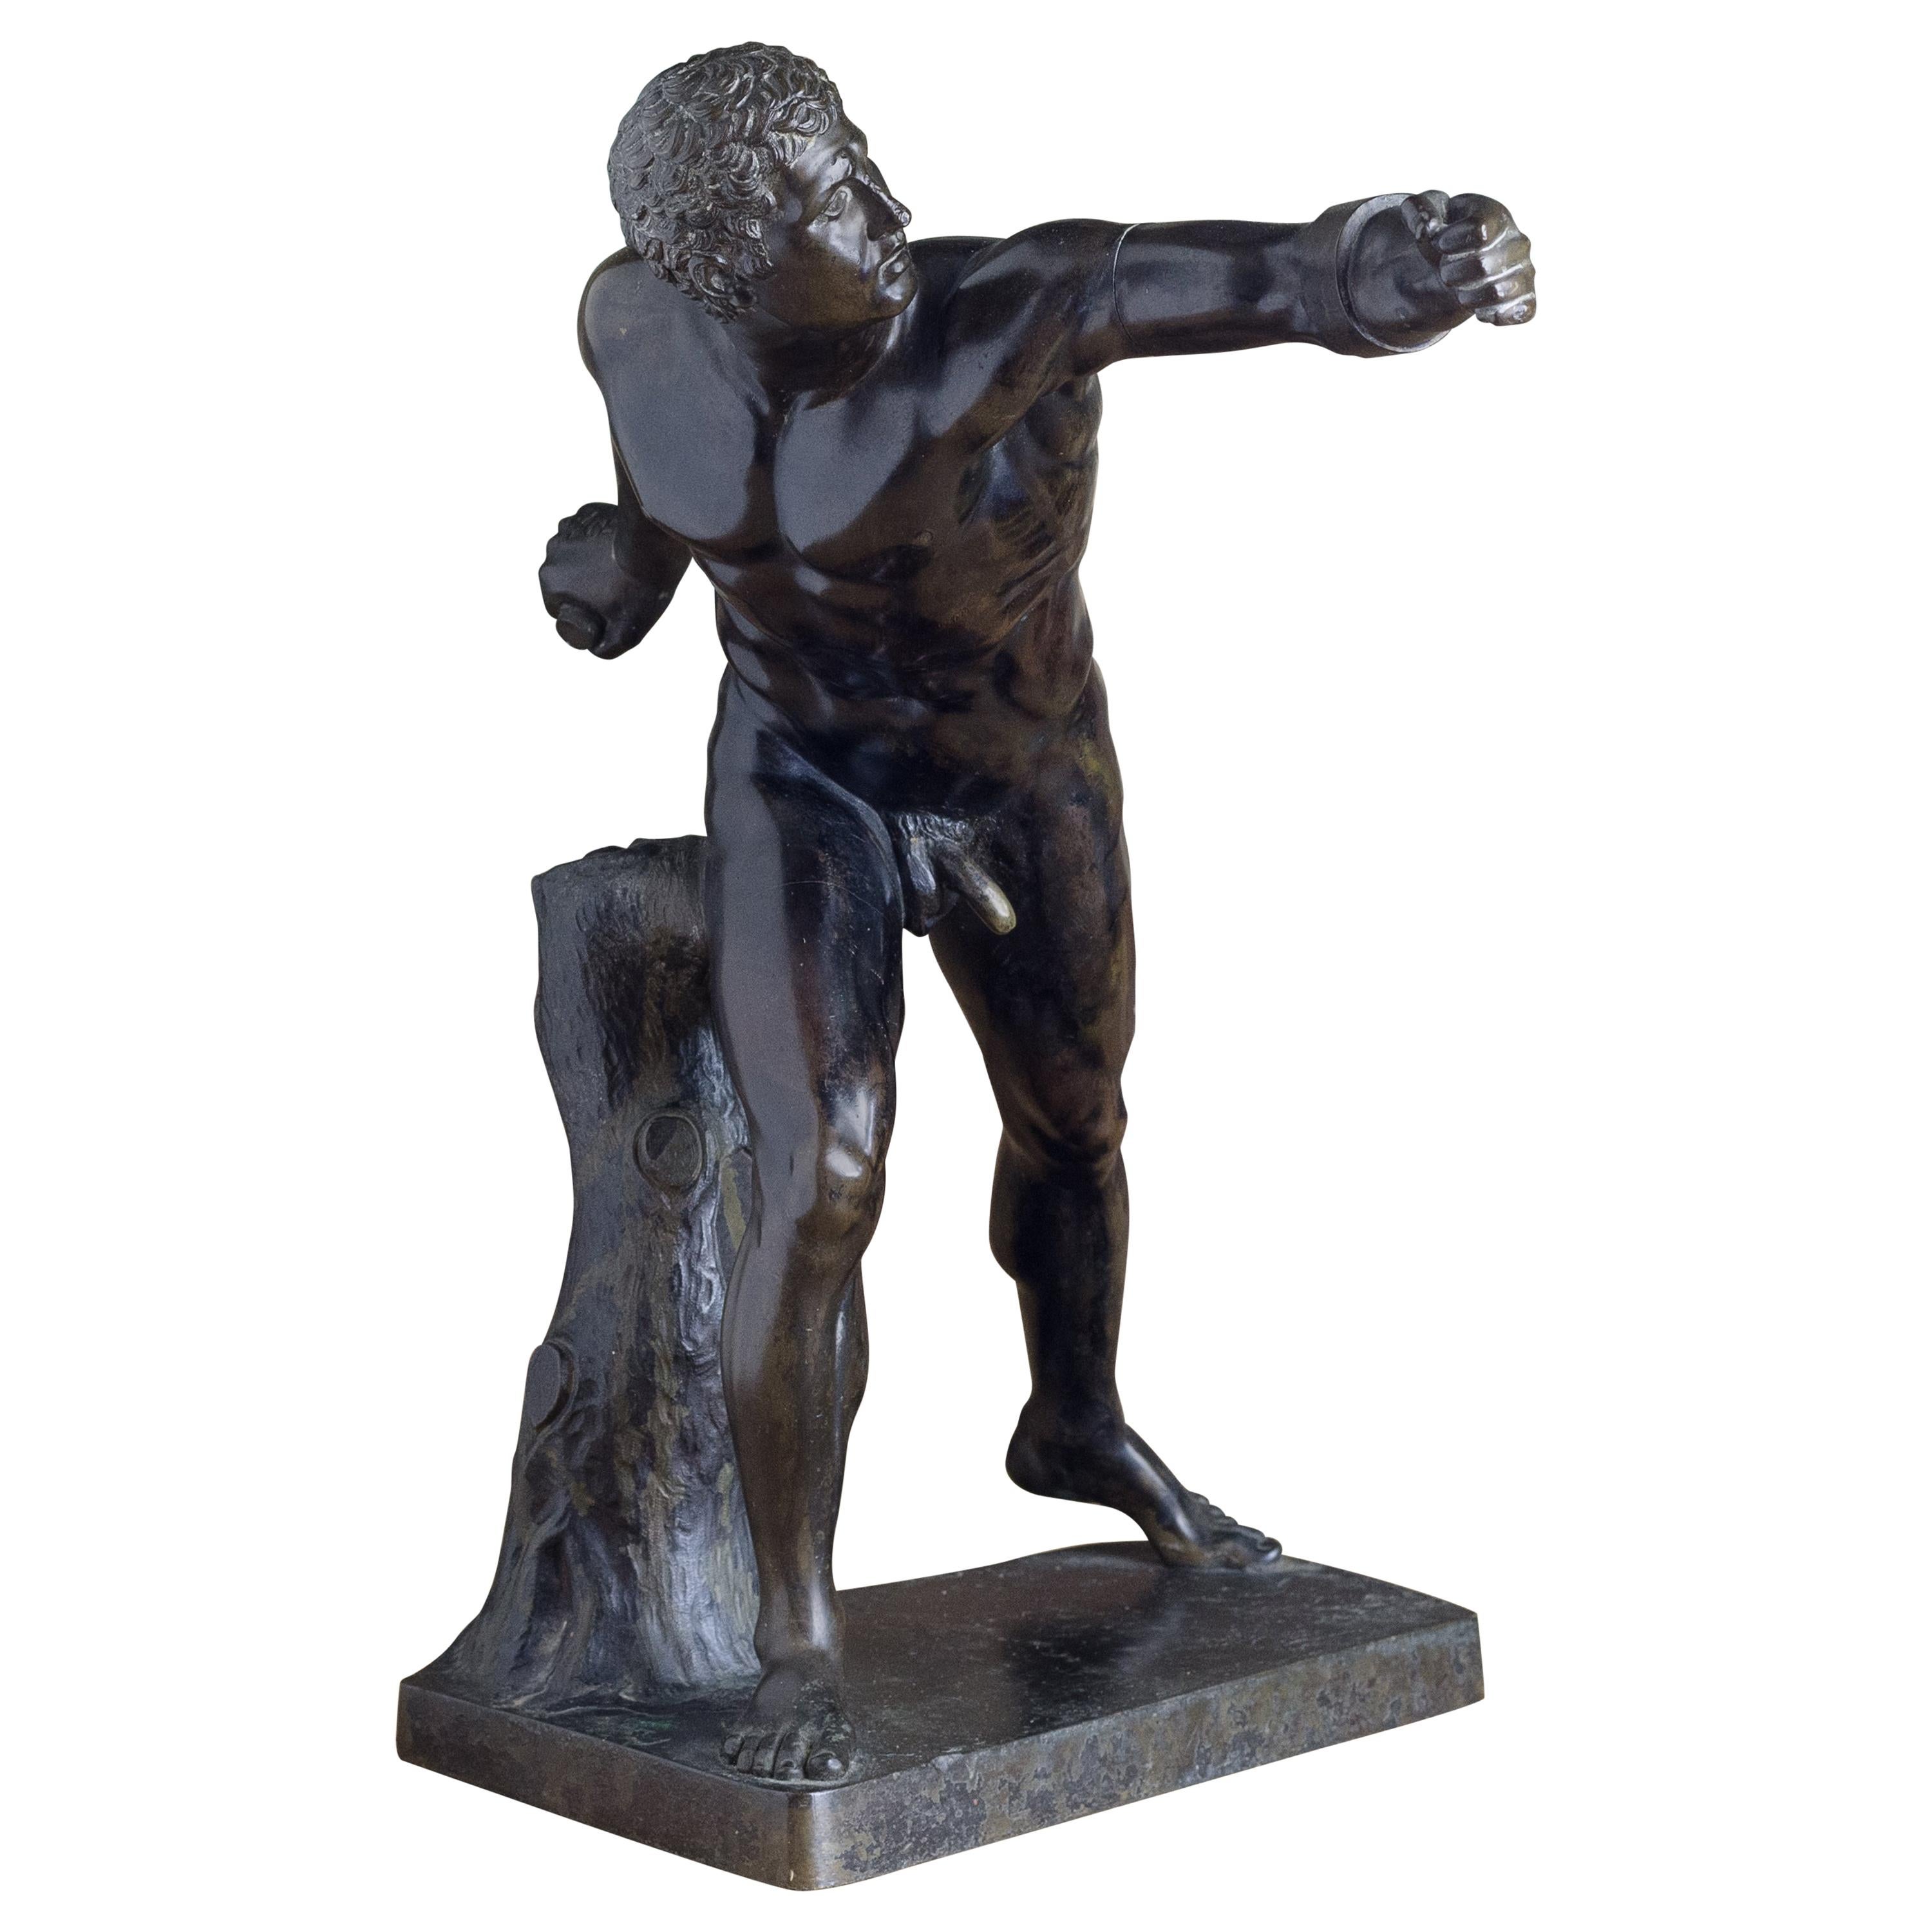 Bronze of the Borghese Gladiator